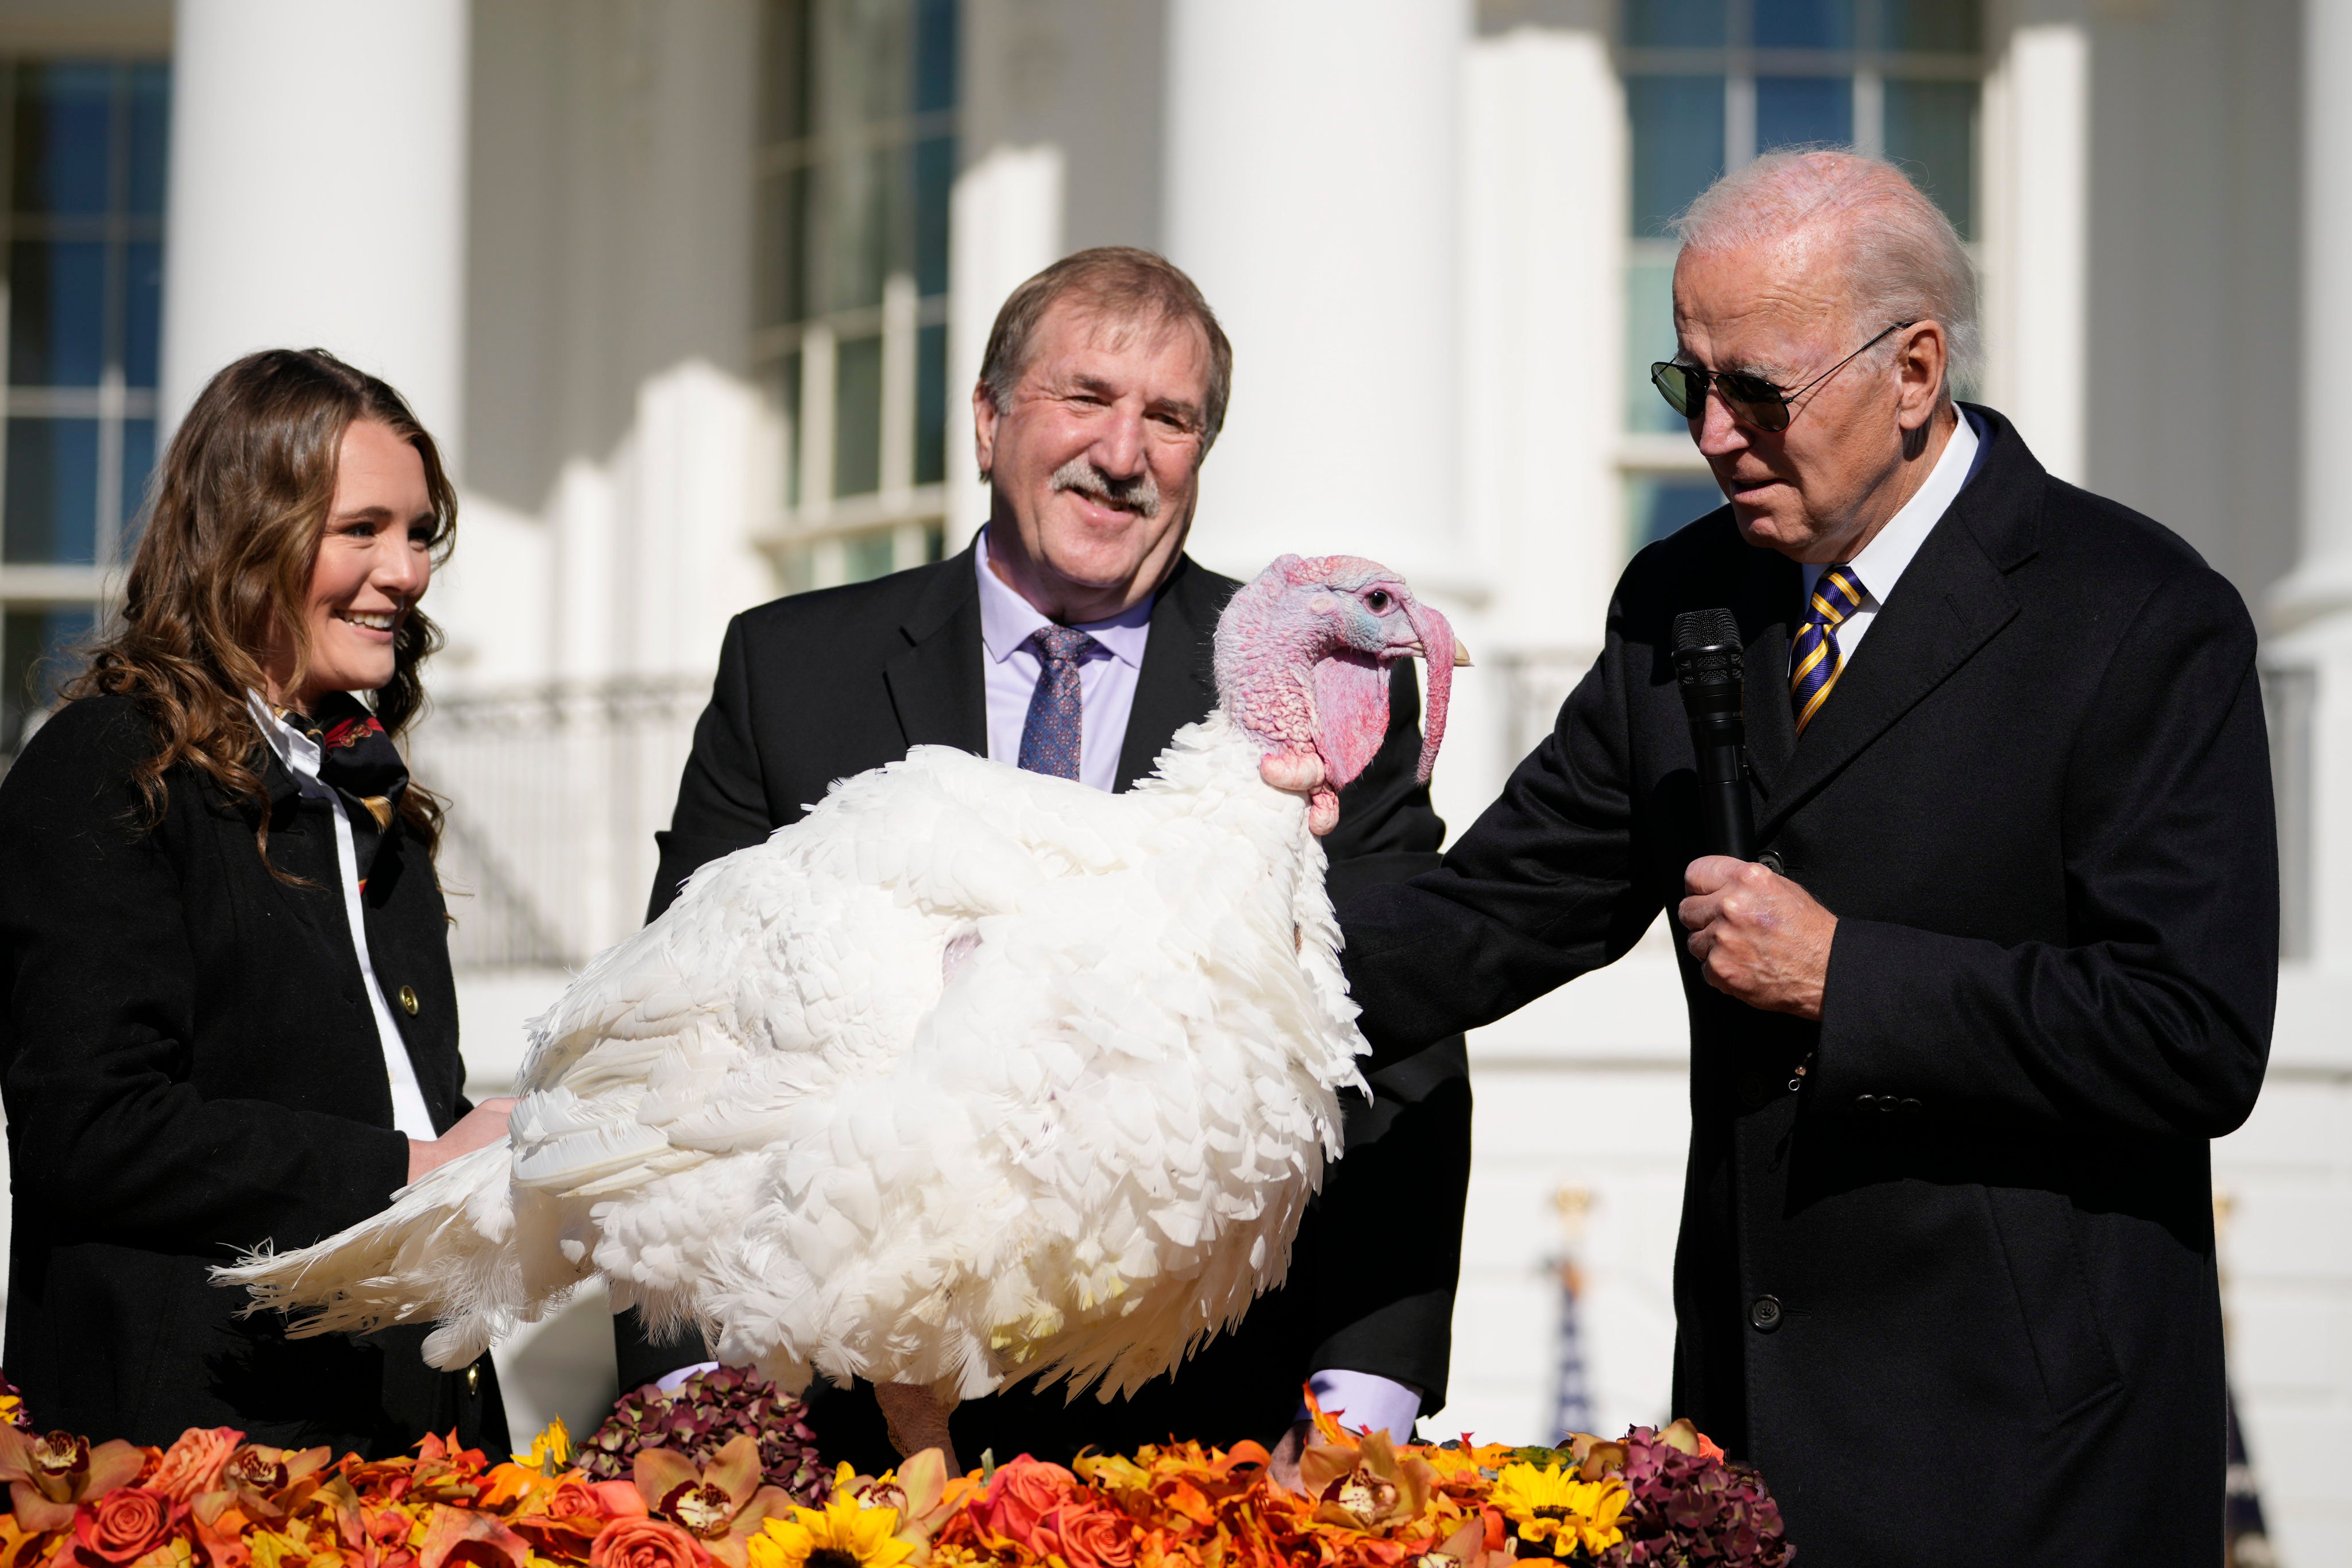 US President Joe Biden pardons Chocolate, the national Thanksgiving turkey, at the White House on Monday. He is joined by Ronald Parker, chairman of the National Turkey Federation, and Alexa Starnes, daughter of the owner of Circle S Ranch. Photo: AP